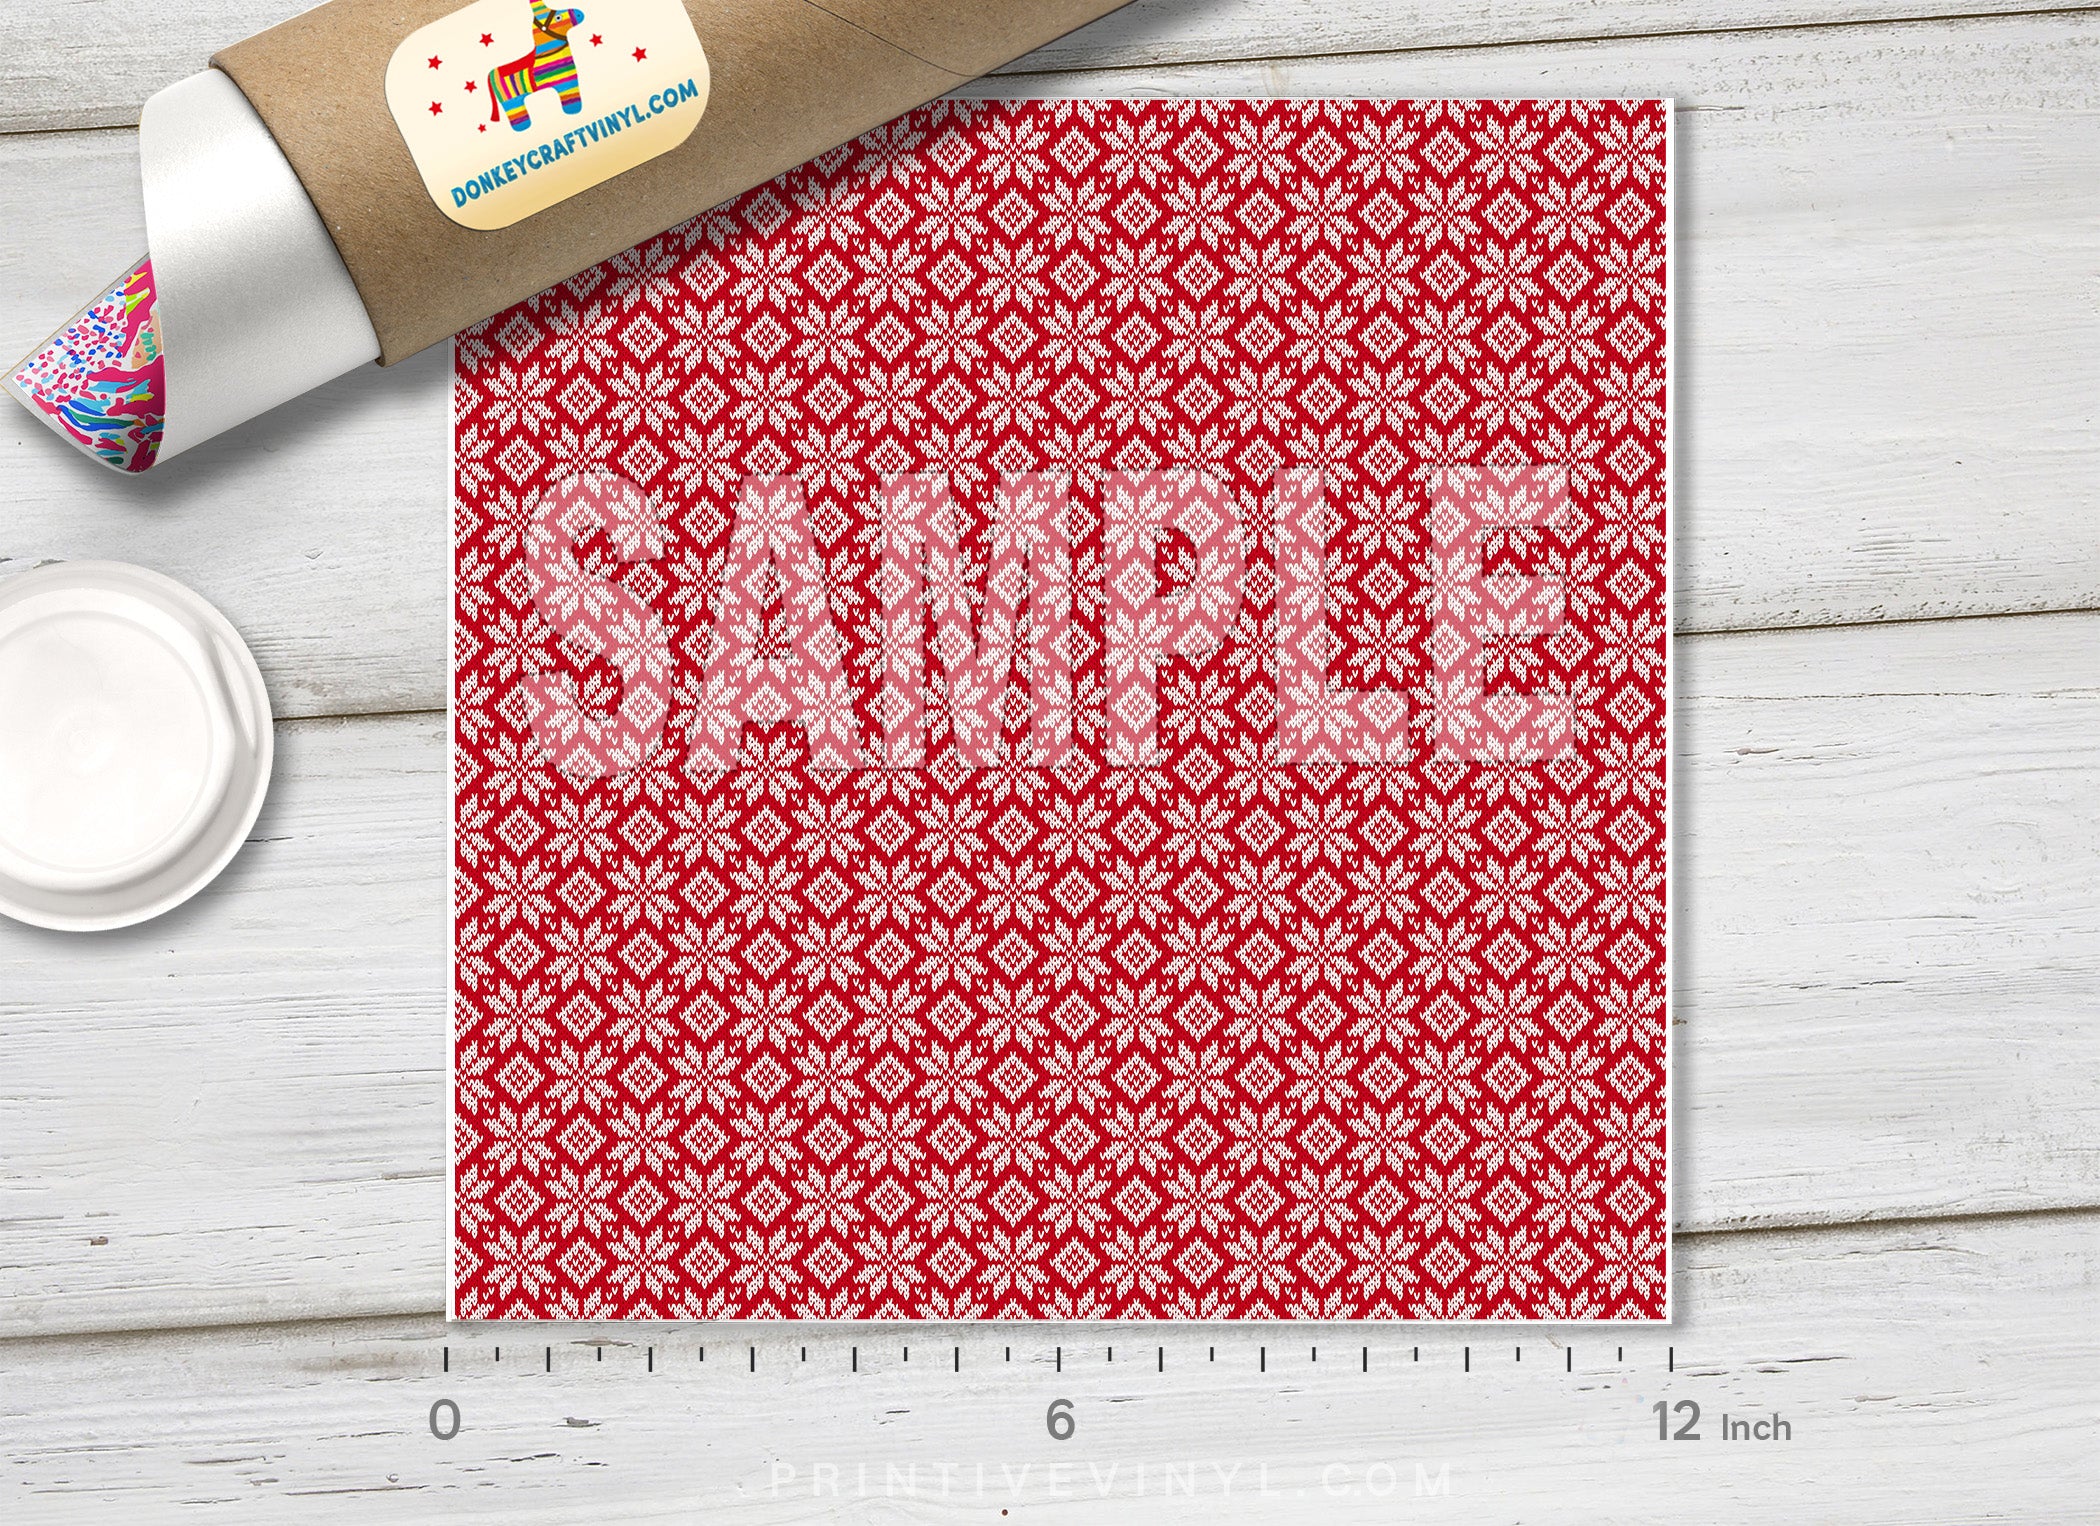 X-mas Nordic Knitted Patterned Adhesive Vinyl 145